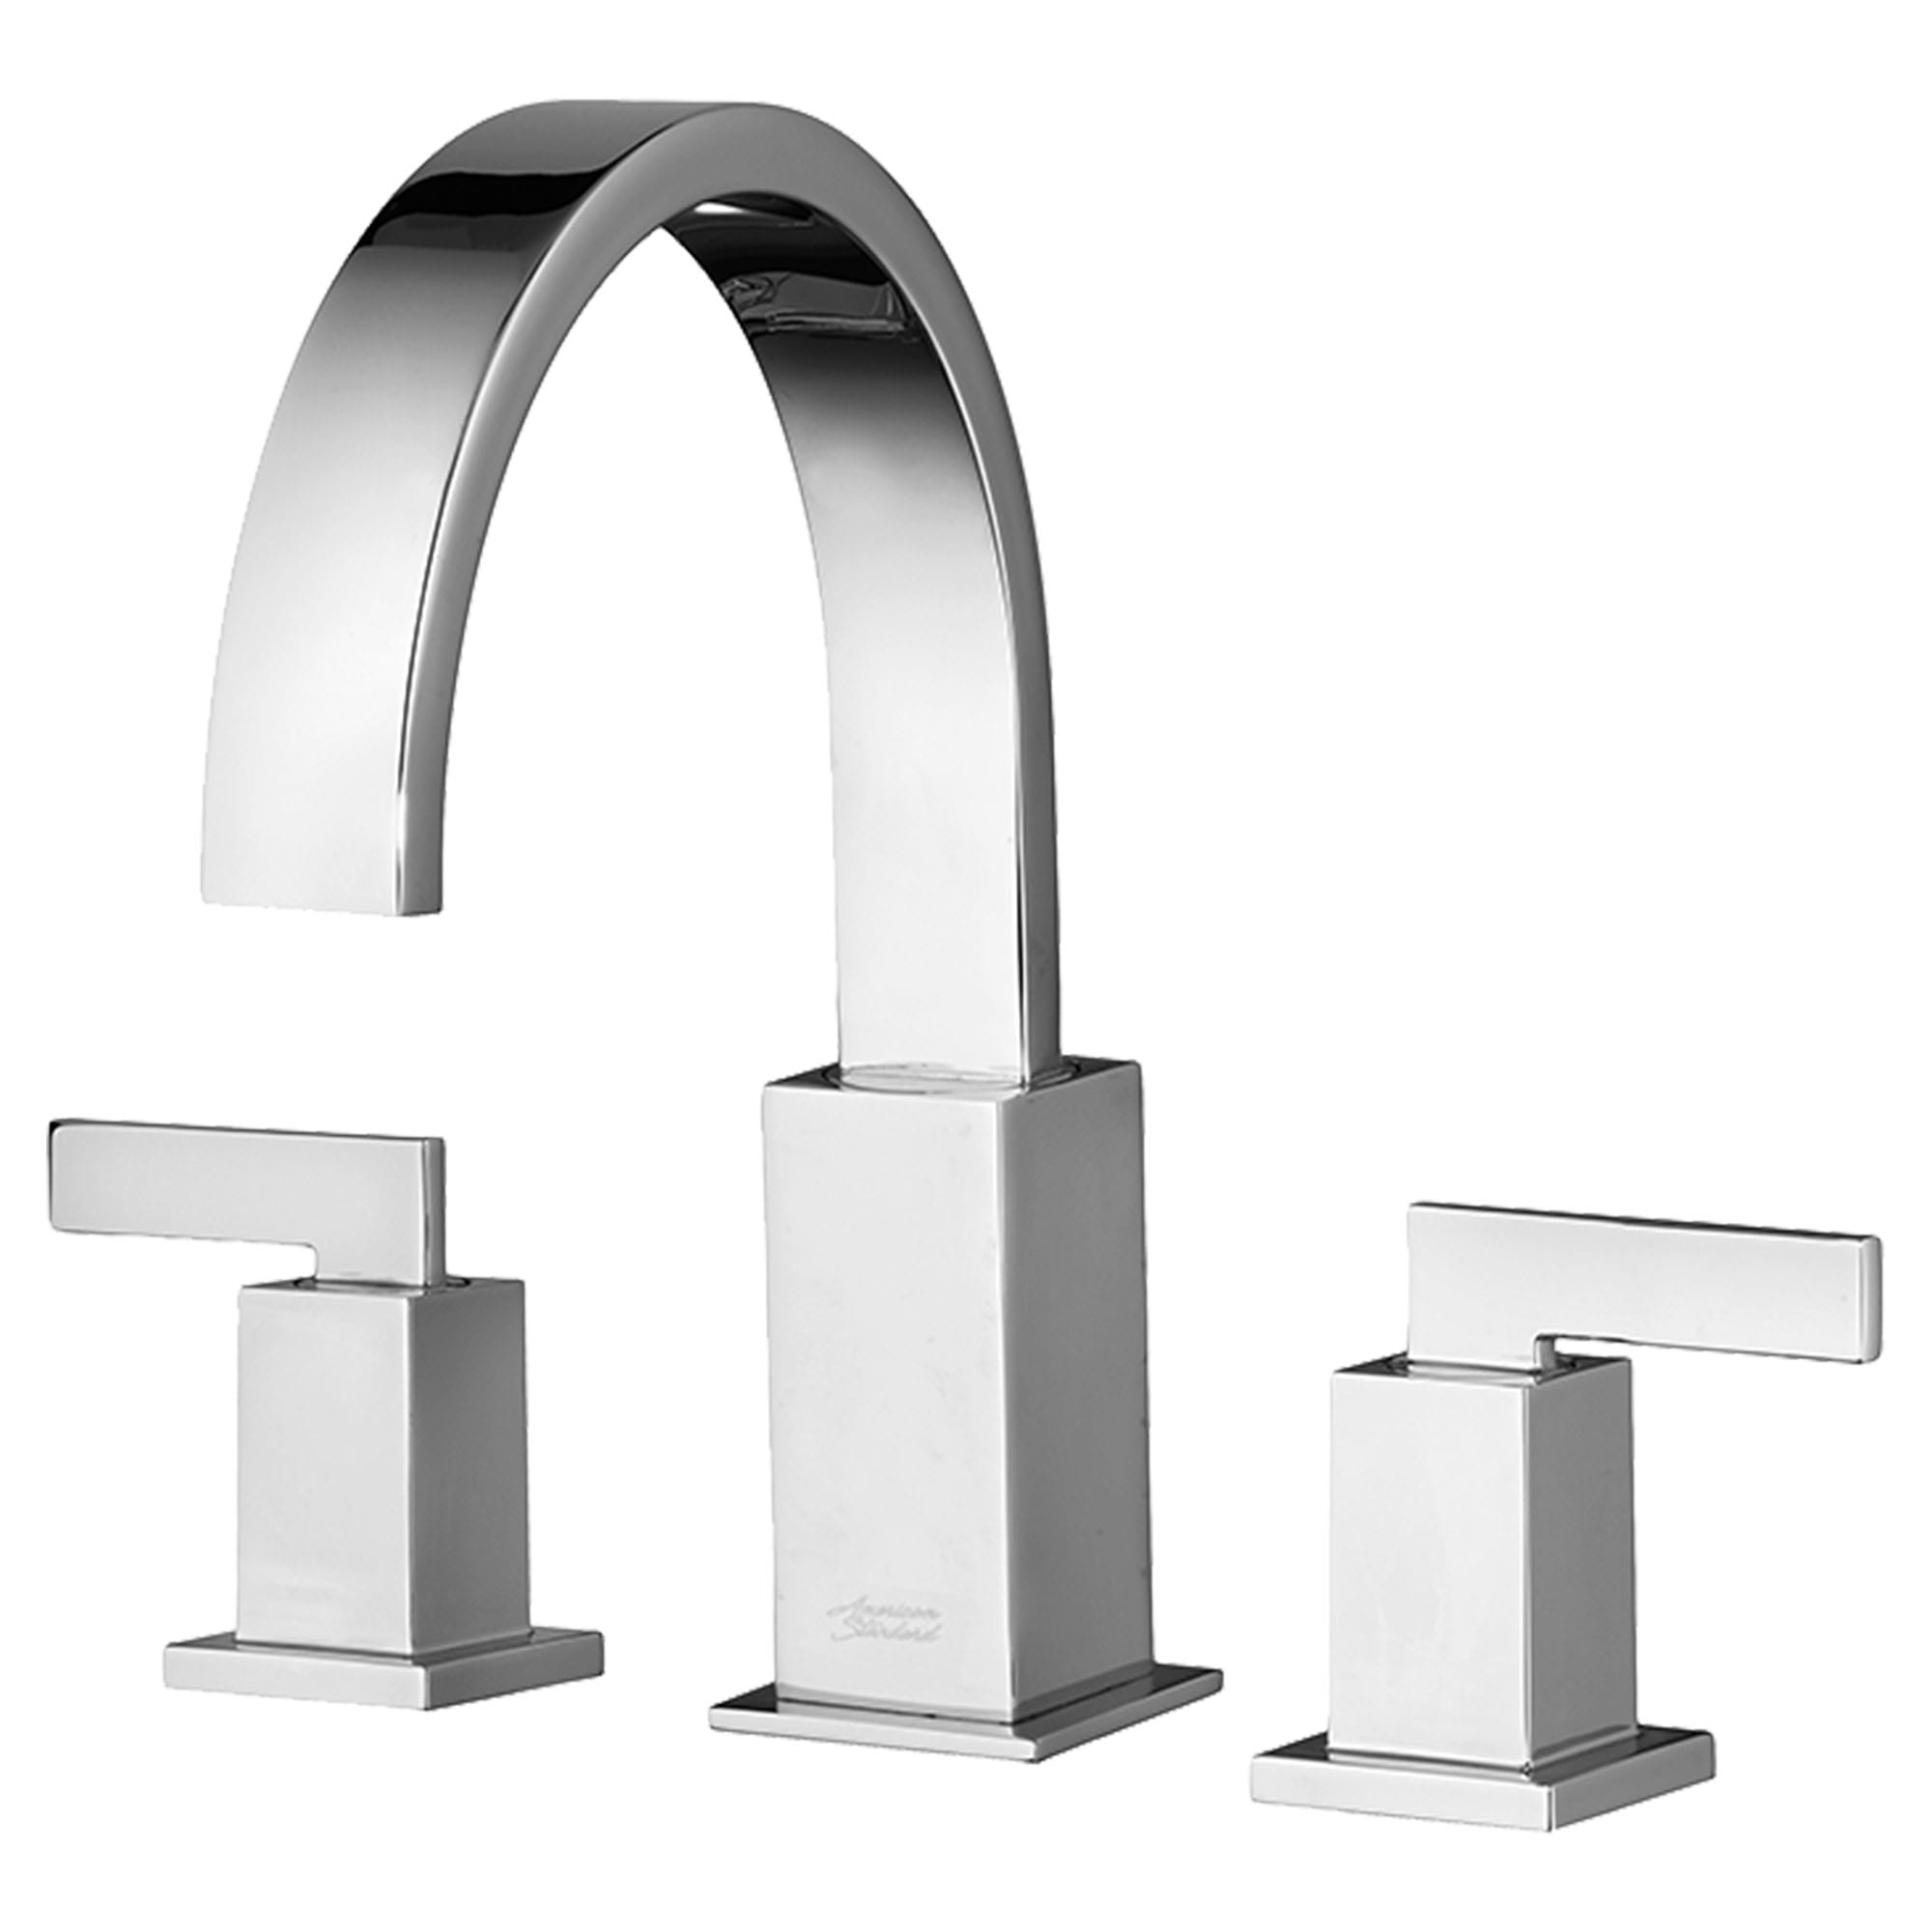 Time Square Bathtub Faucet With Lever Handles for Flash Rough In Valve CHROME